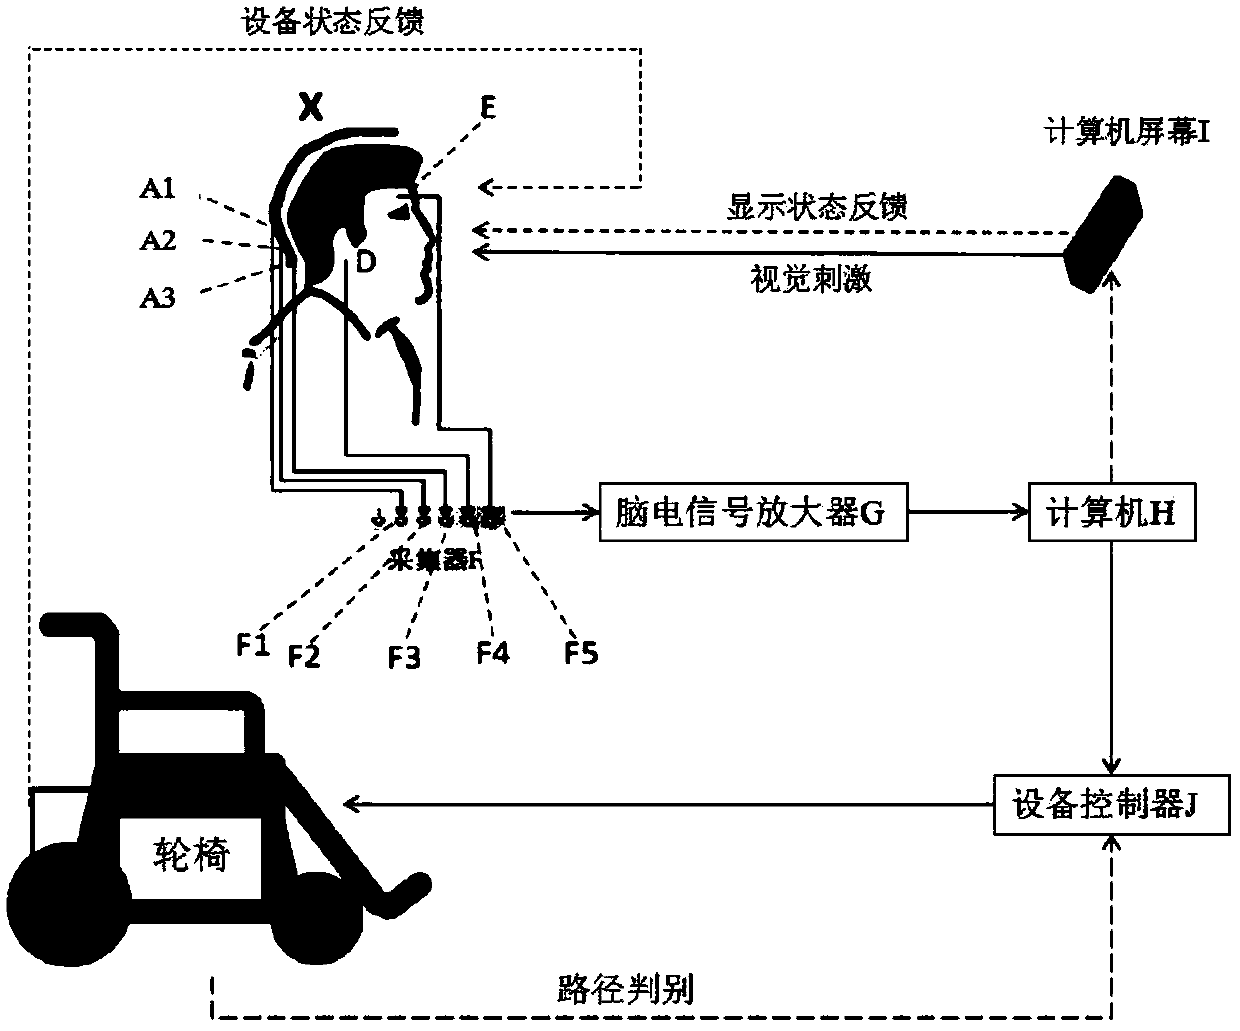 Intelligent wheelchair control and route optimization method based on visual evoked brain-computer interface